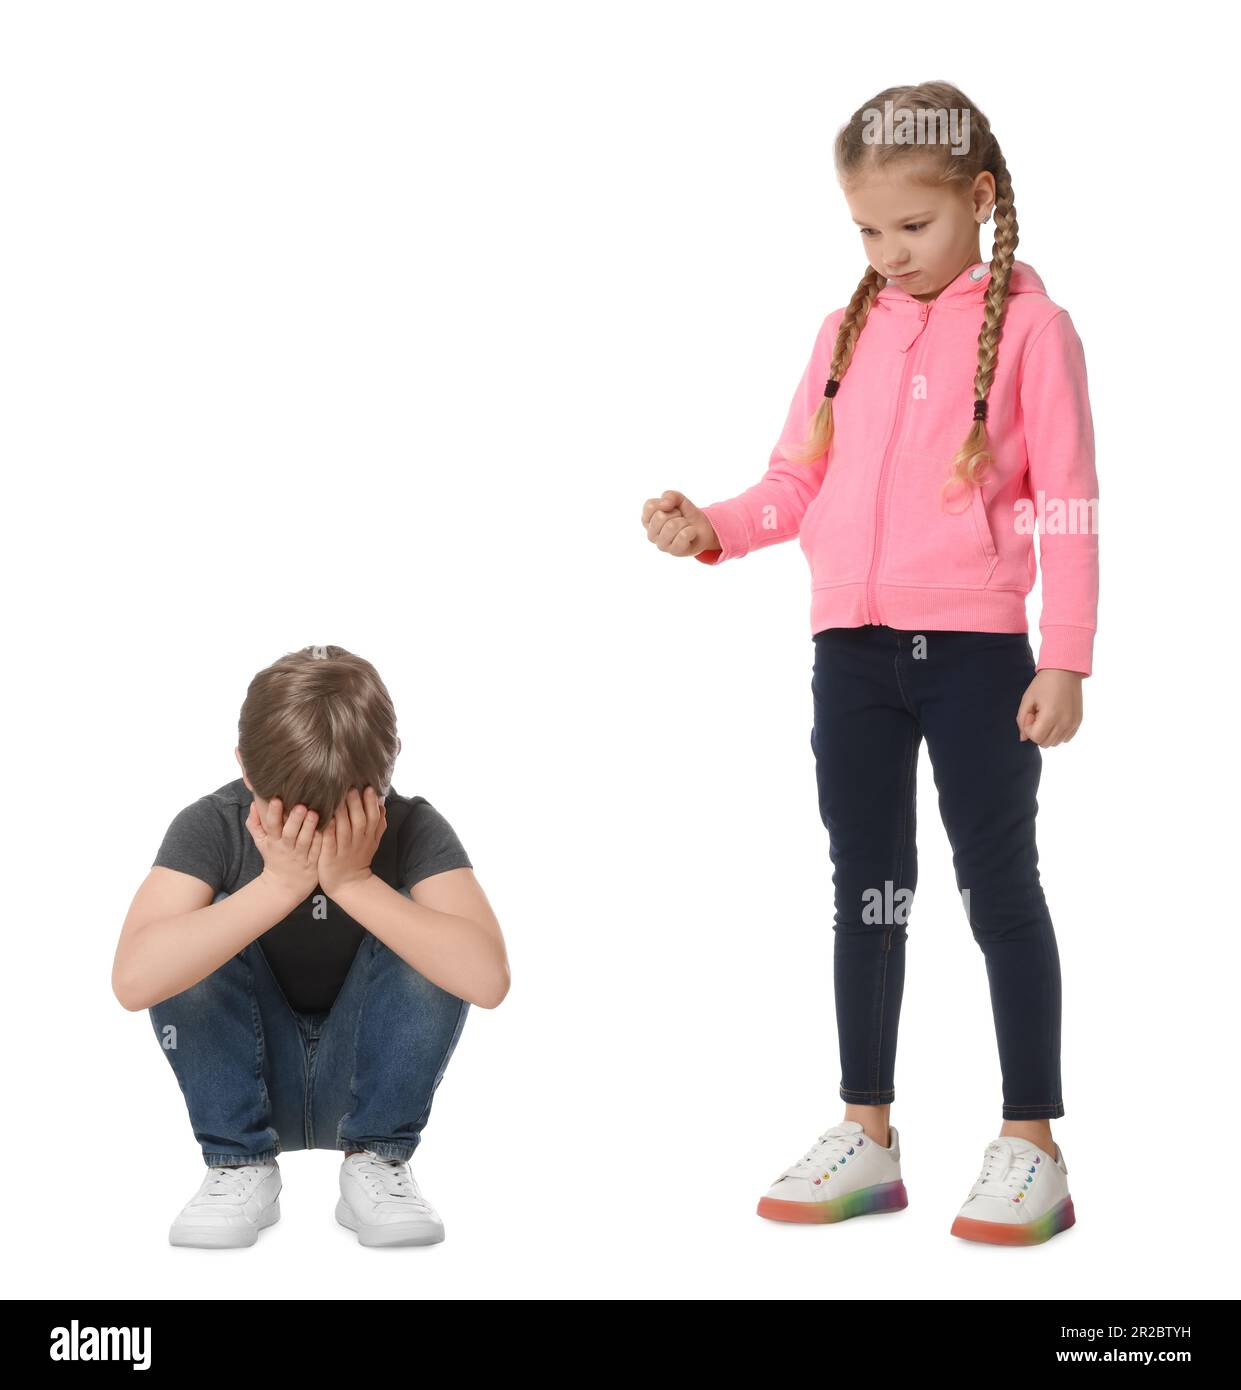 Girl with clenched fist looking at scared boy on white background. Children's bullying Stock Photo